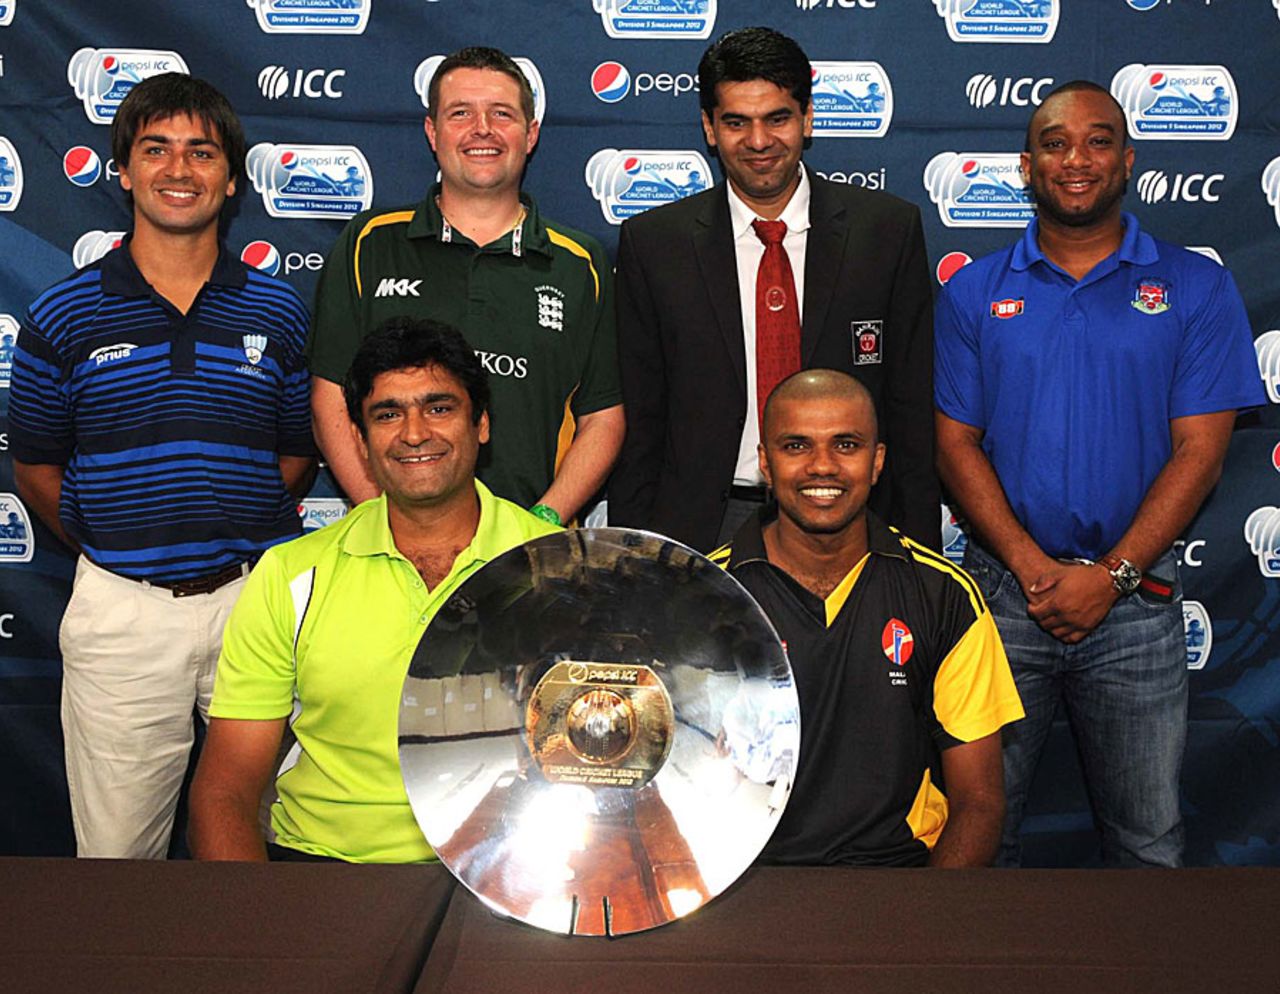 Captains pose with the ICC World Cricket League Division 5 trophy, Singapore, February 17, 2012